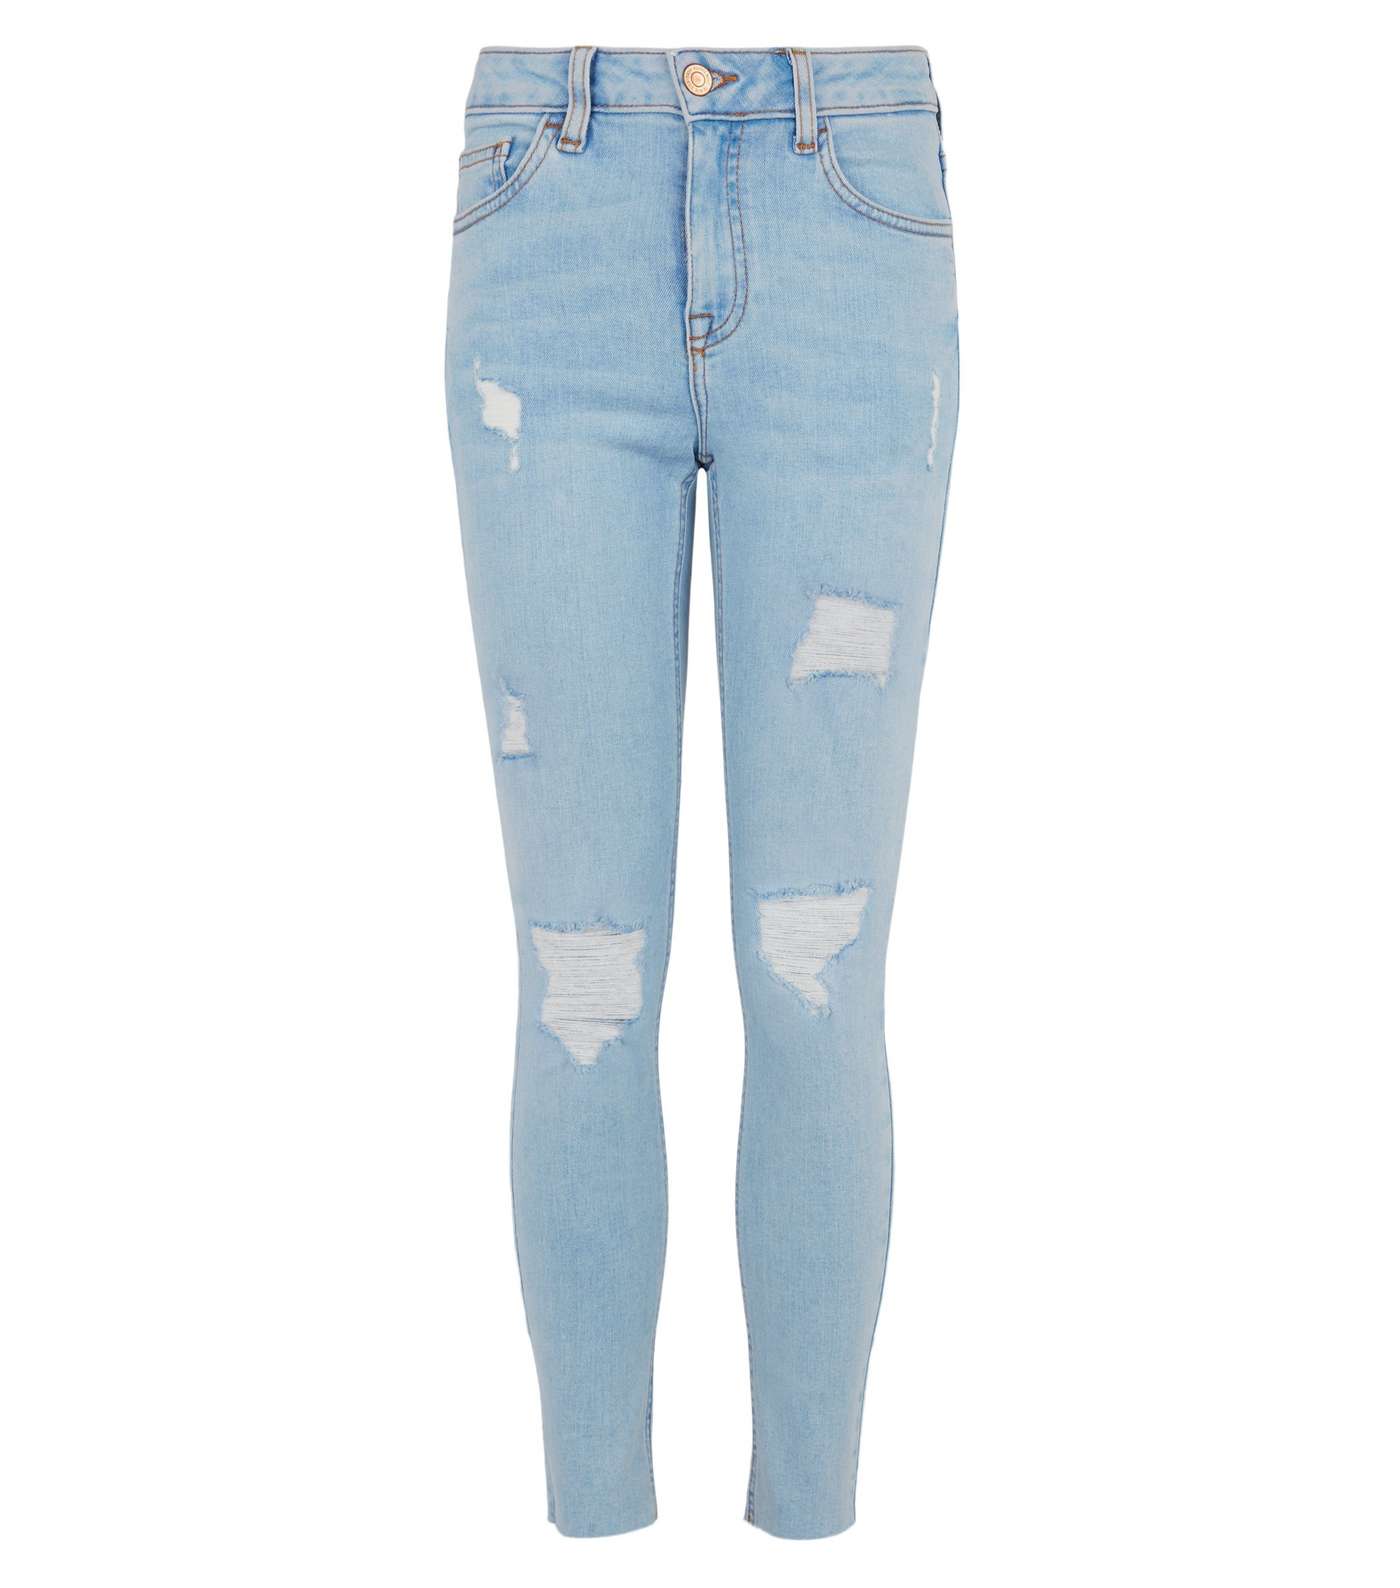 Girls Pale Blue Bleach Ripped Skinny Jeans Image 4